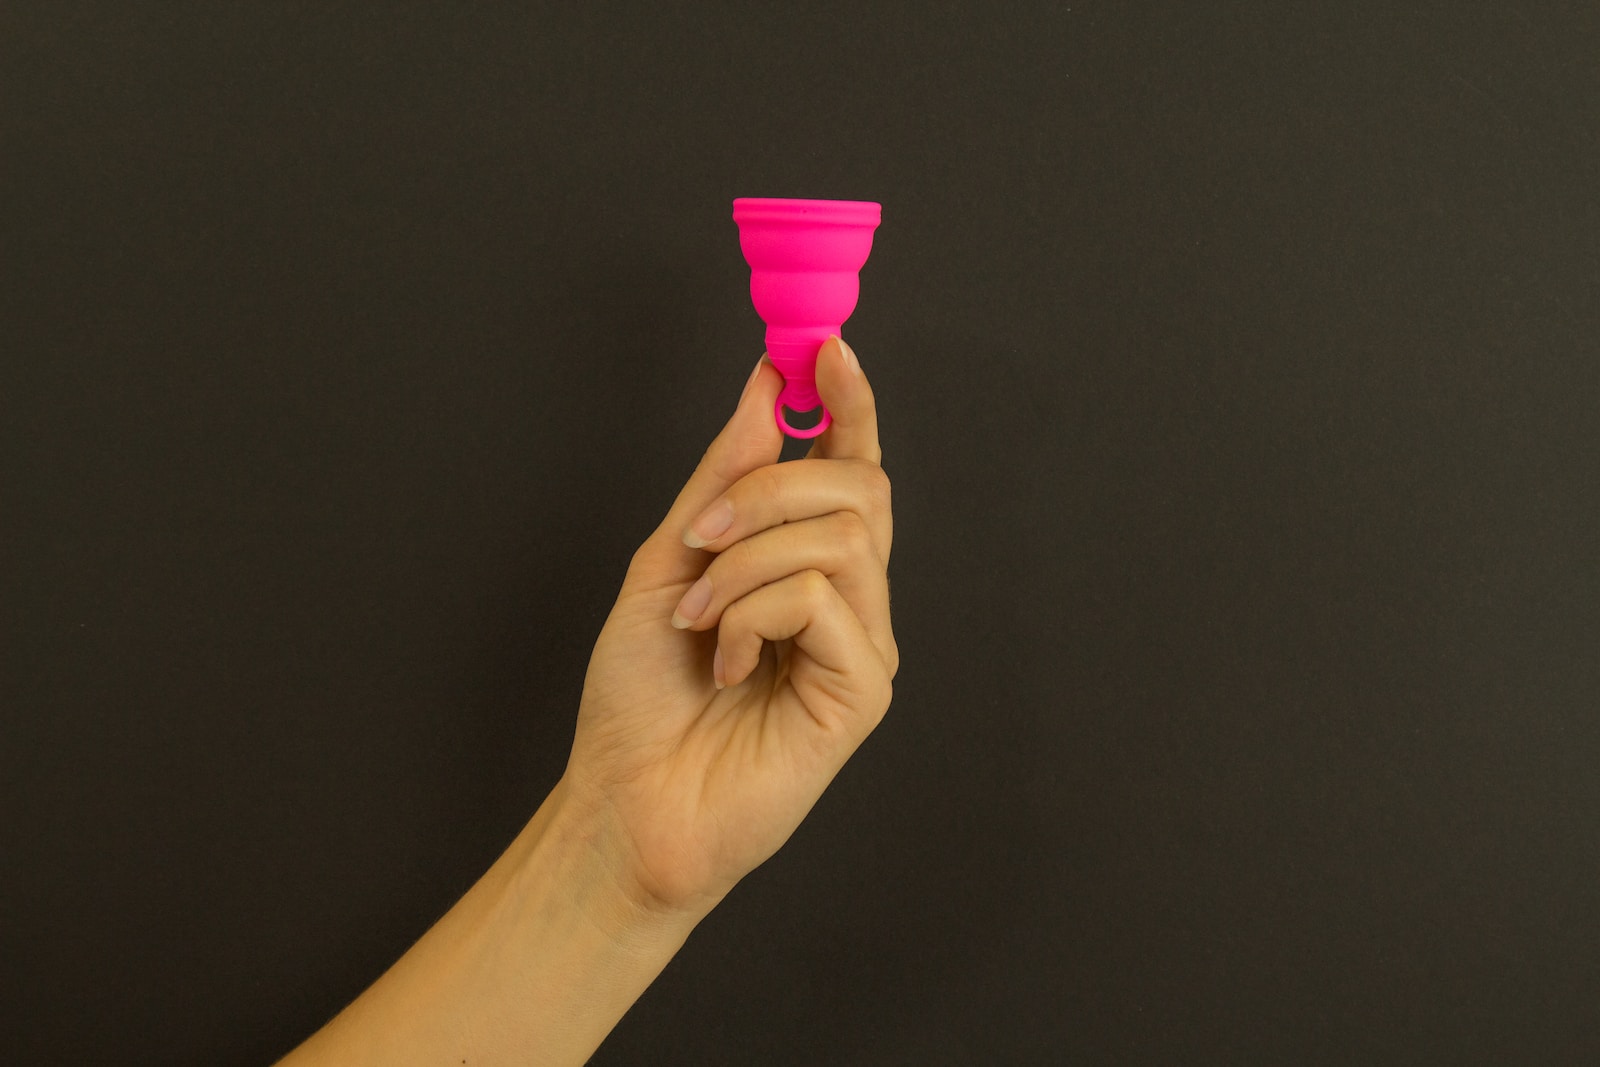 a person holding a pink cup in their hand